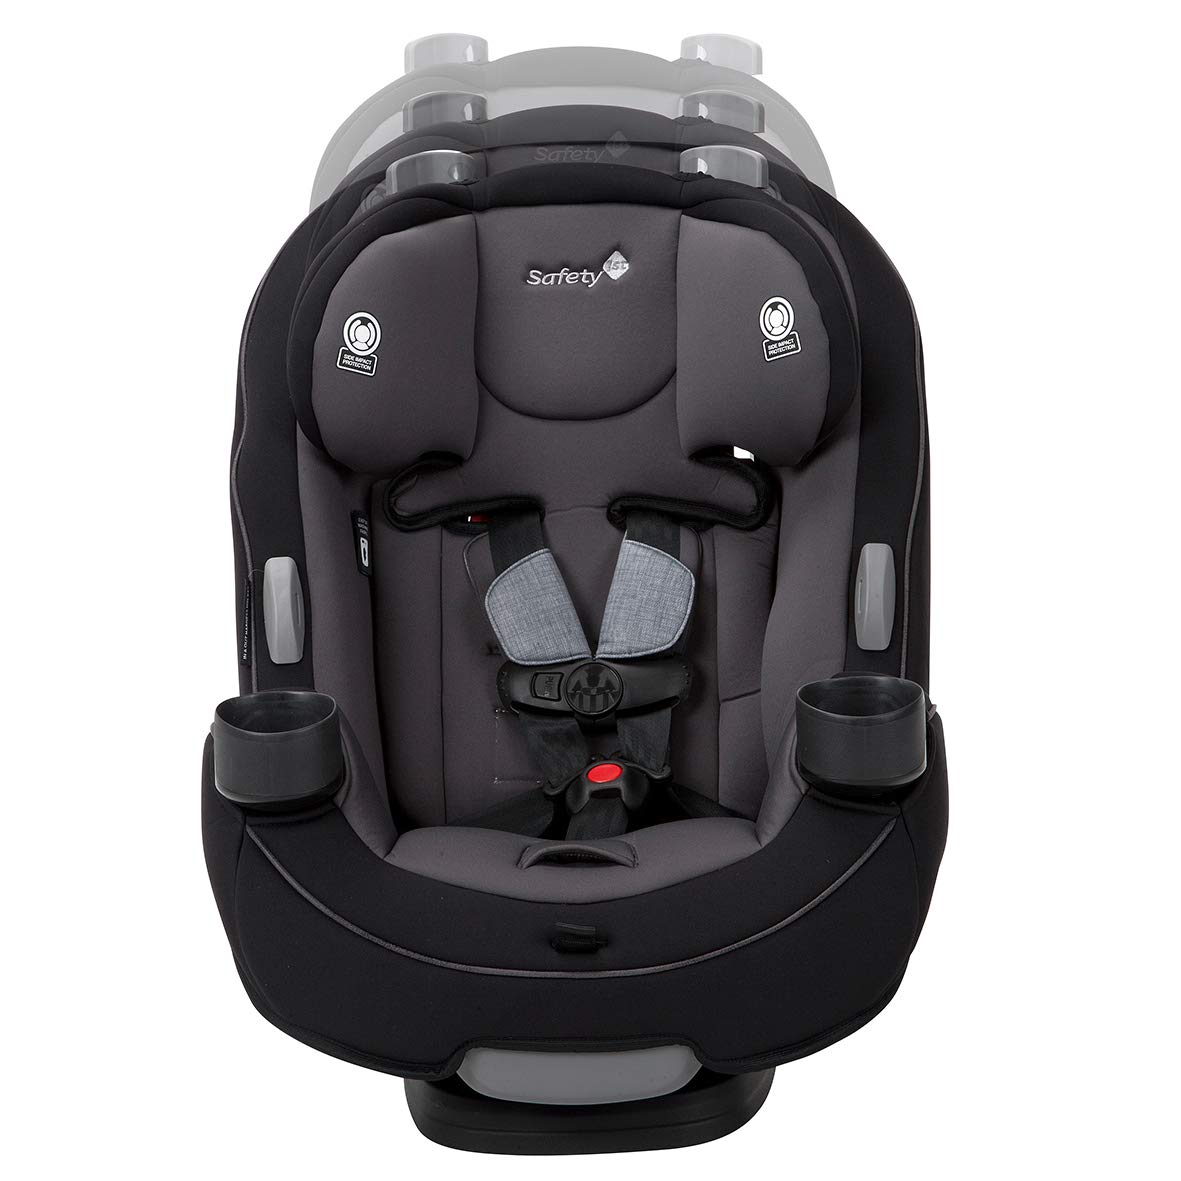 Safety First Grow And Go 3-In-1 Convertible Car Seat Harvest Moon